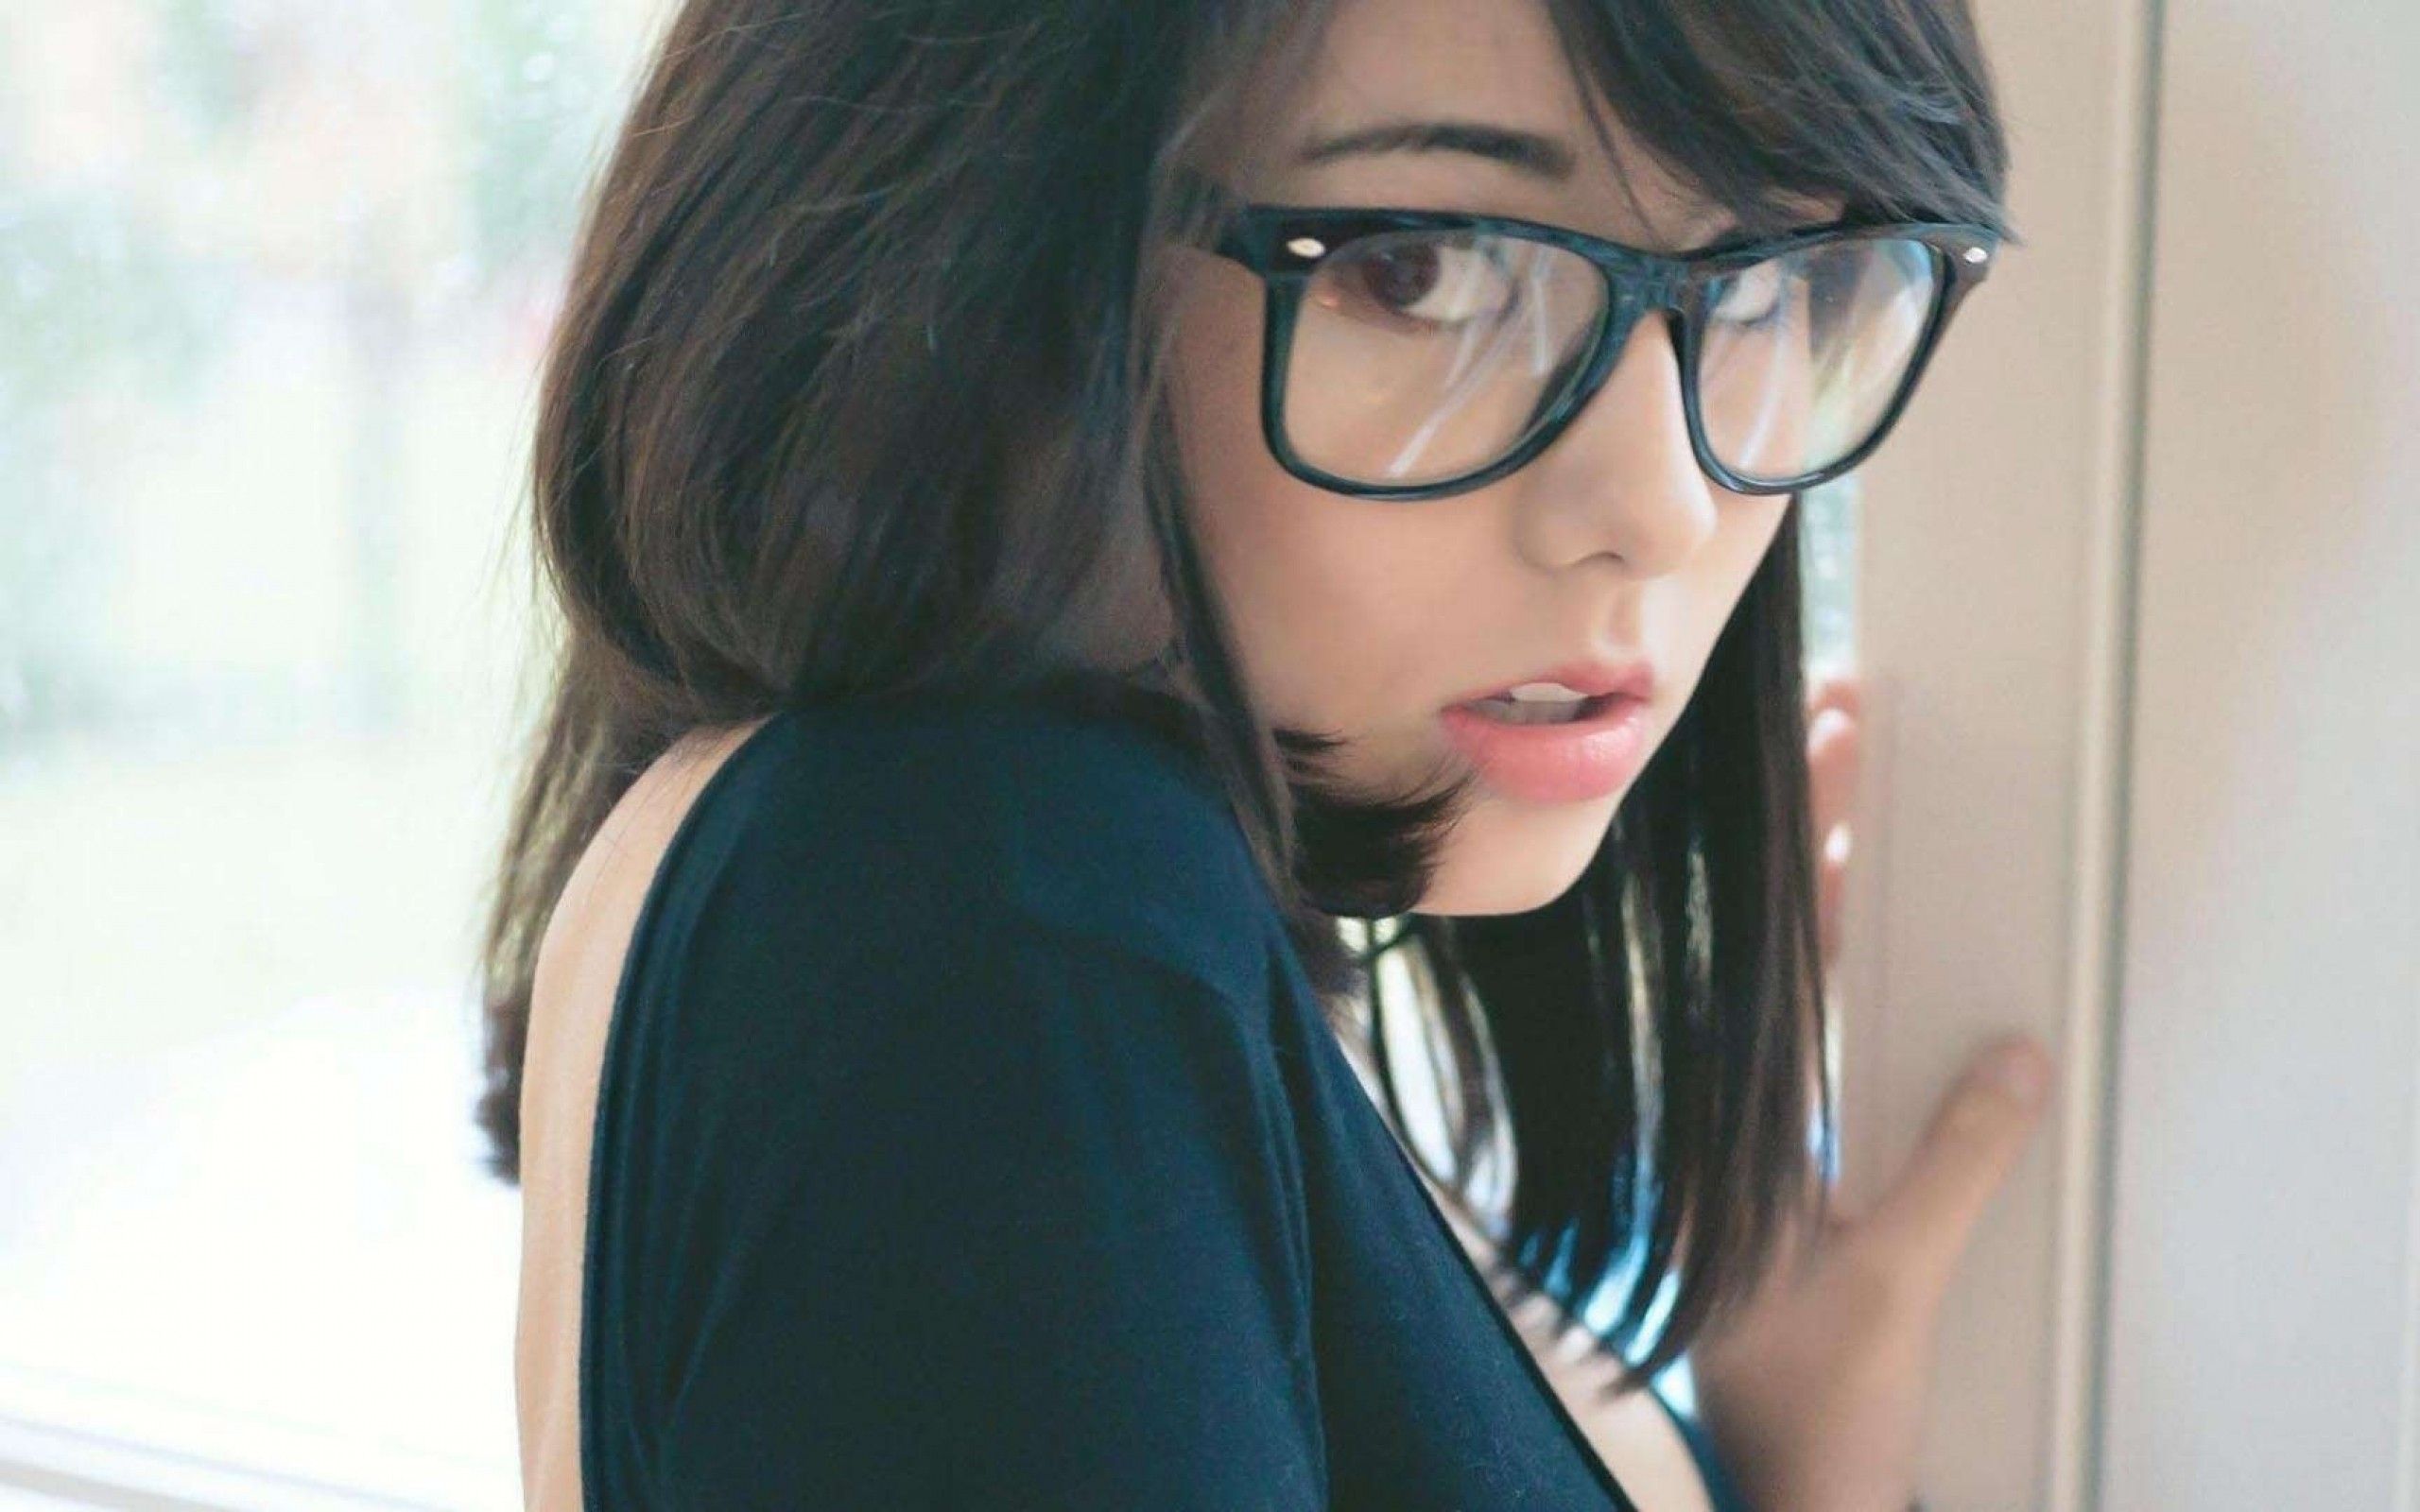 Cute Girl With Glasses